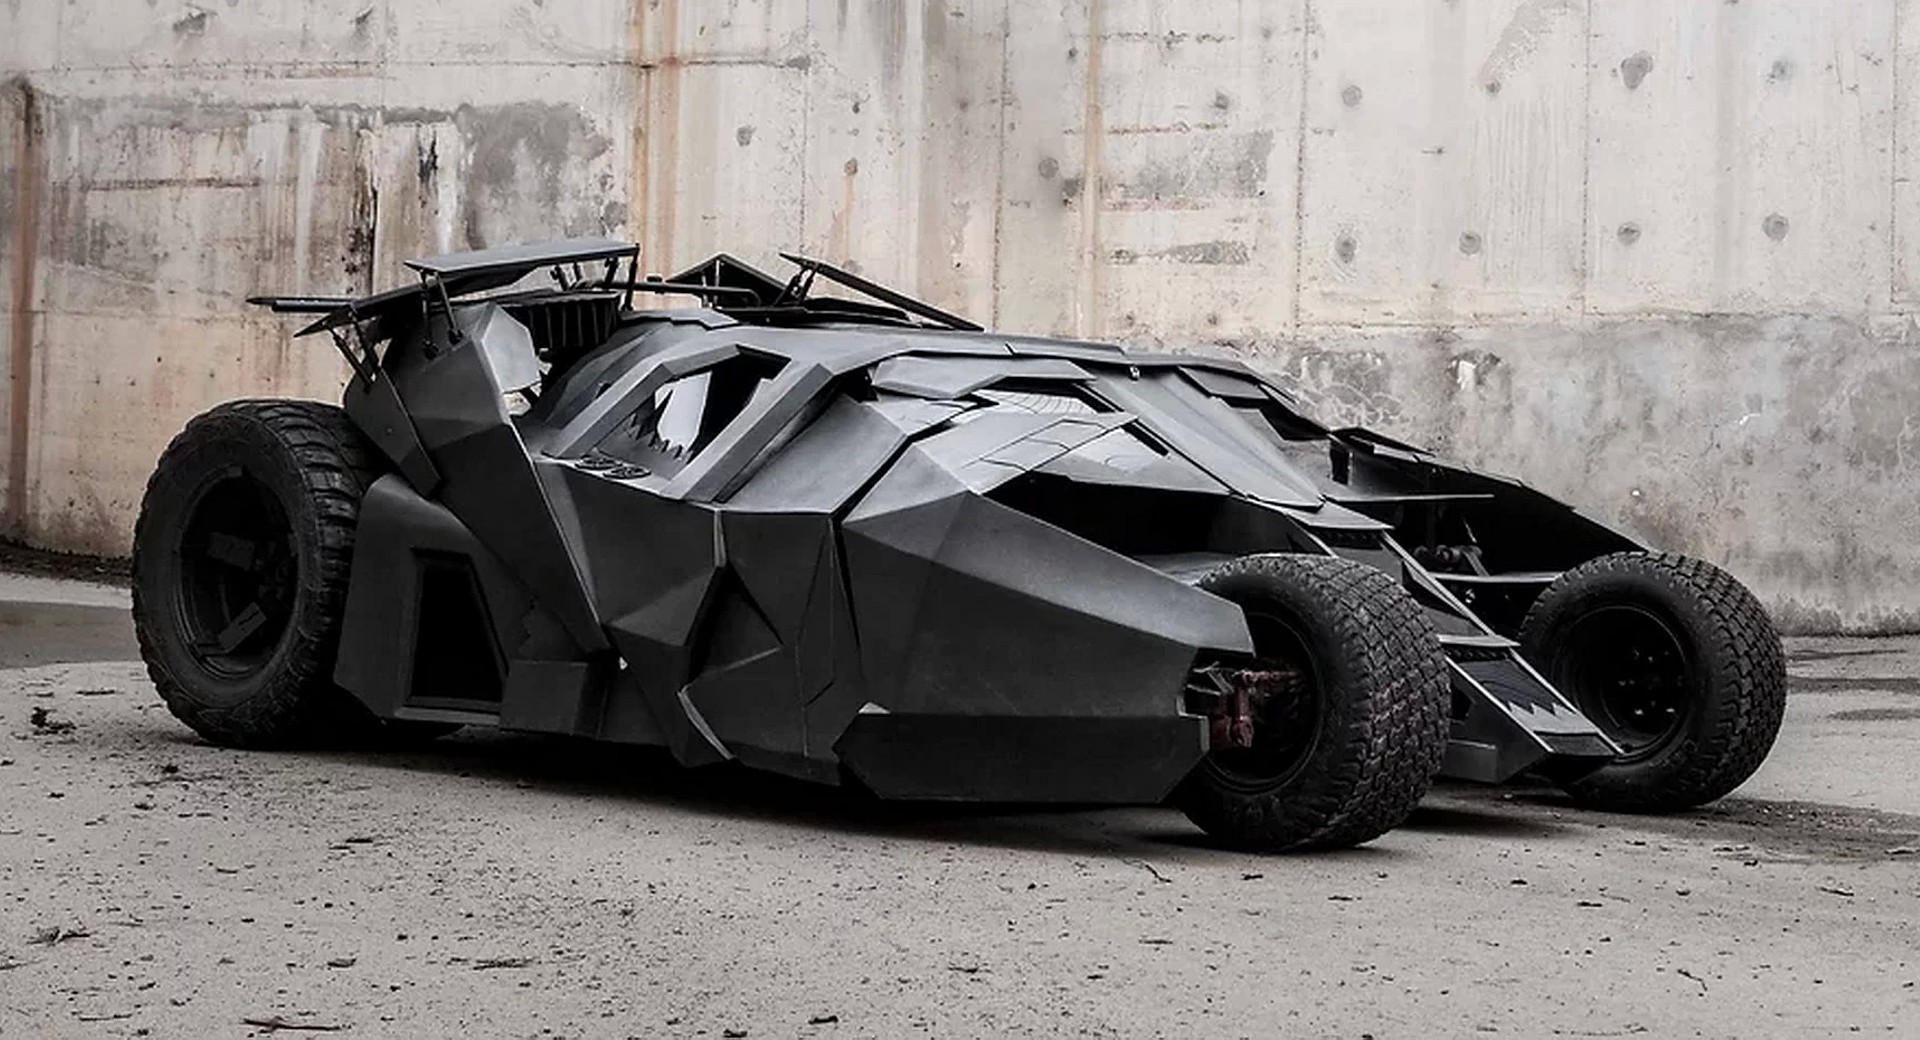 The Goes Green With This Electric Batmobile Tumbler Replica |